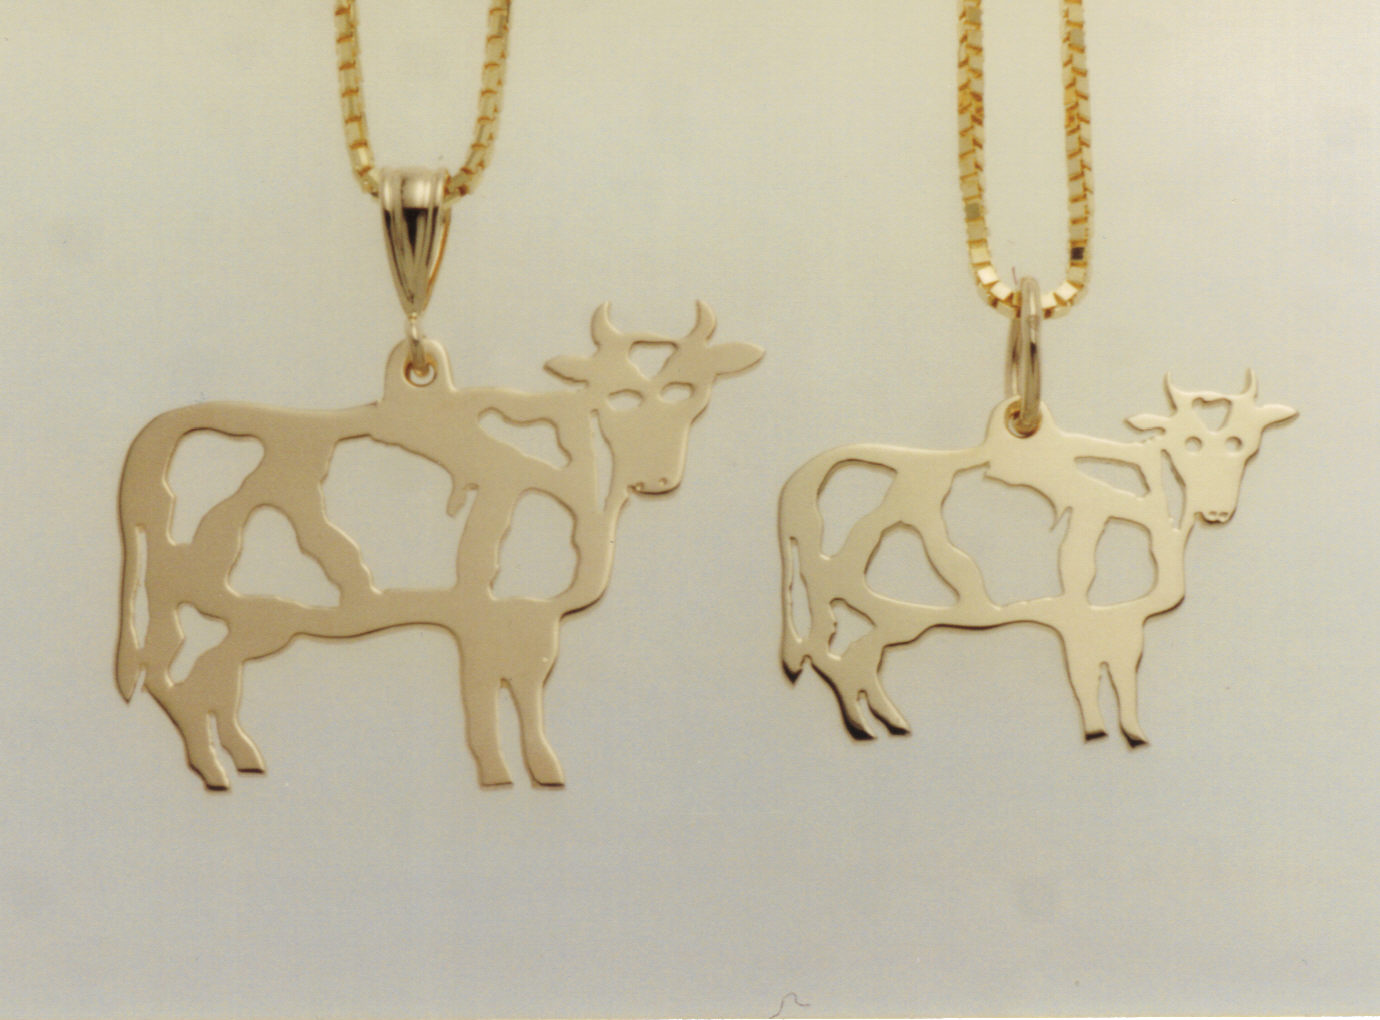 Wis-cow-sin Cow Pendant and Charm